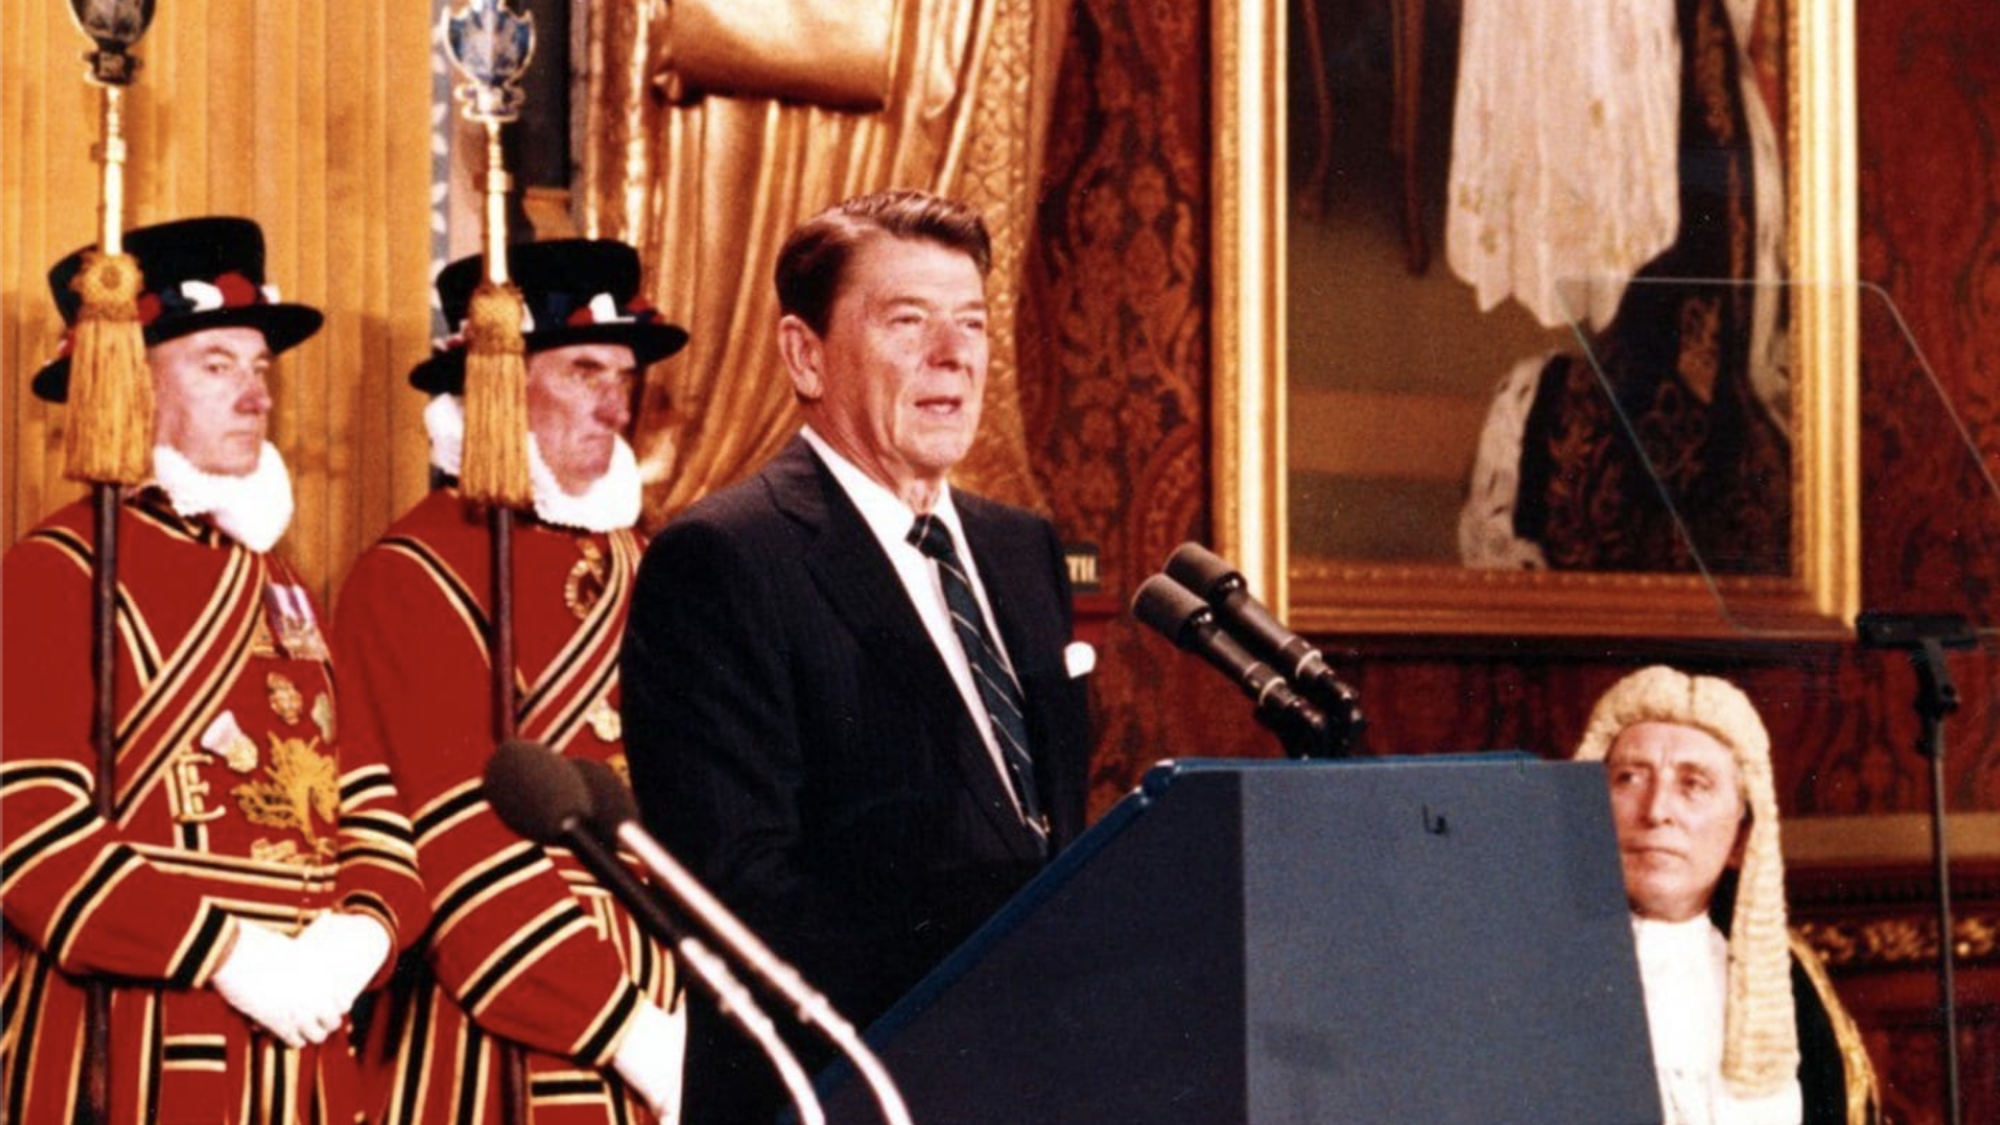 Ronald Reagan is standing at a podium and addresses the British parliament.